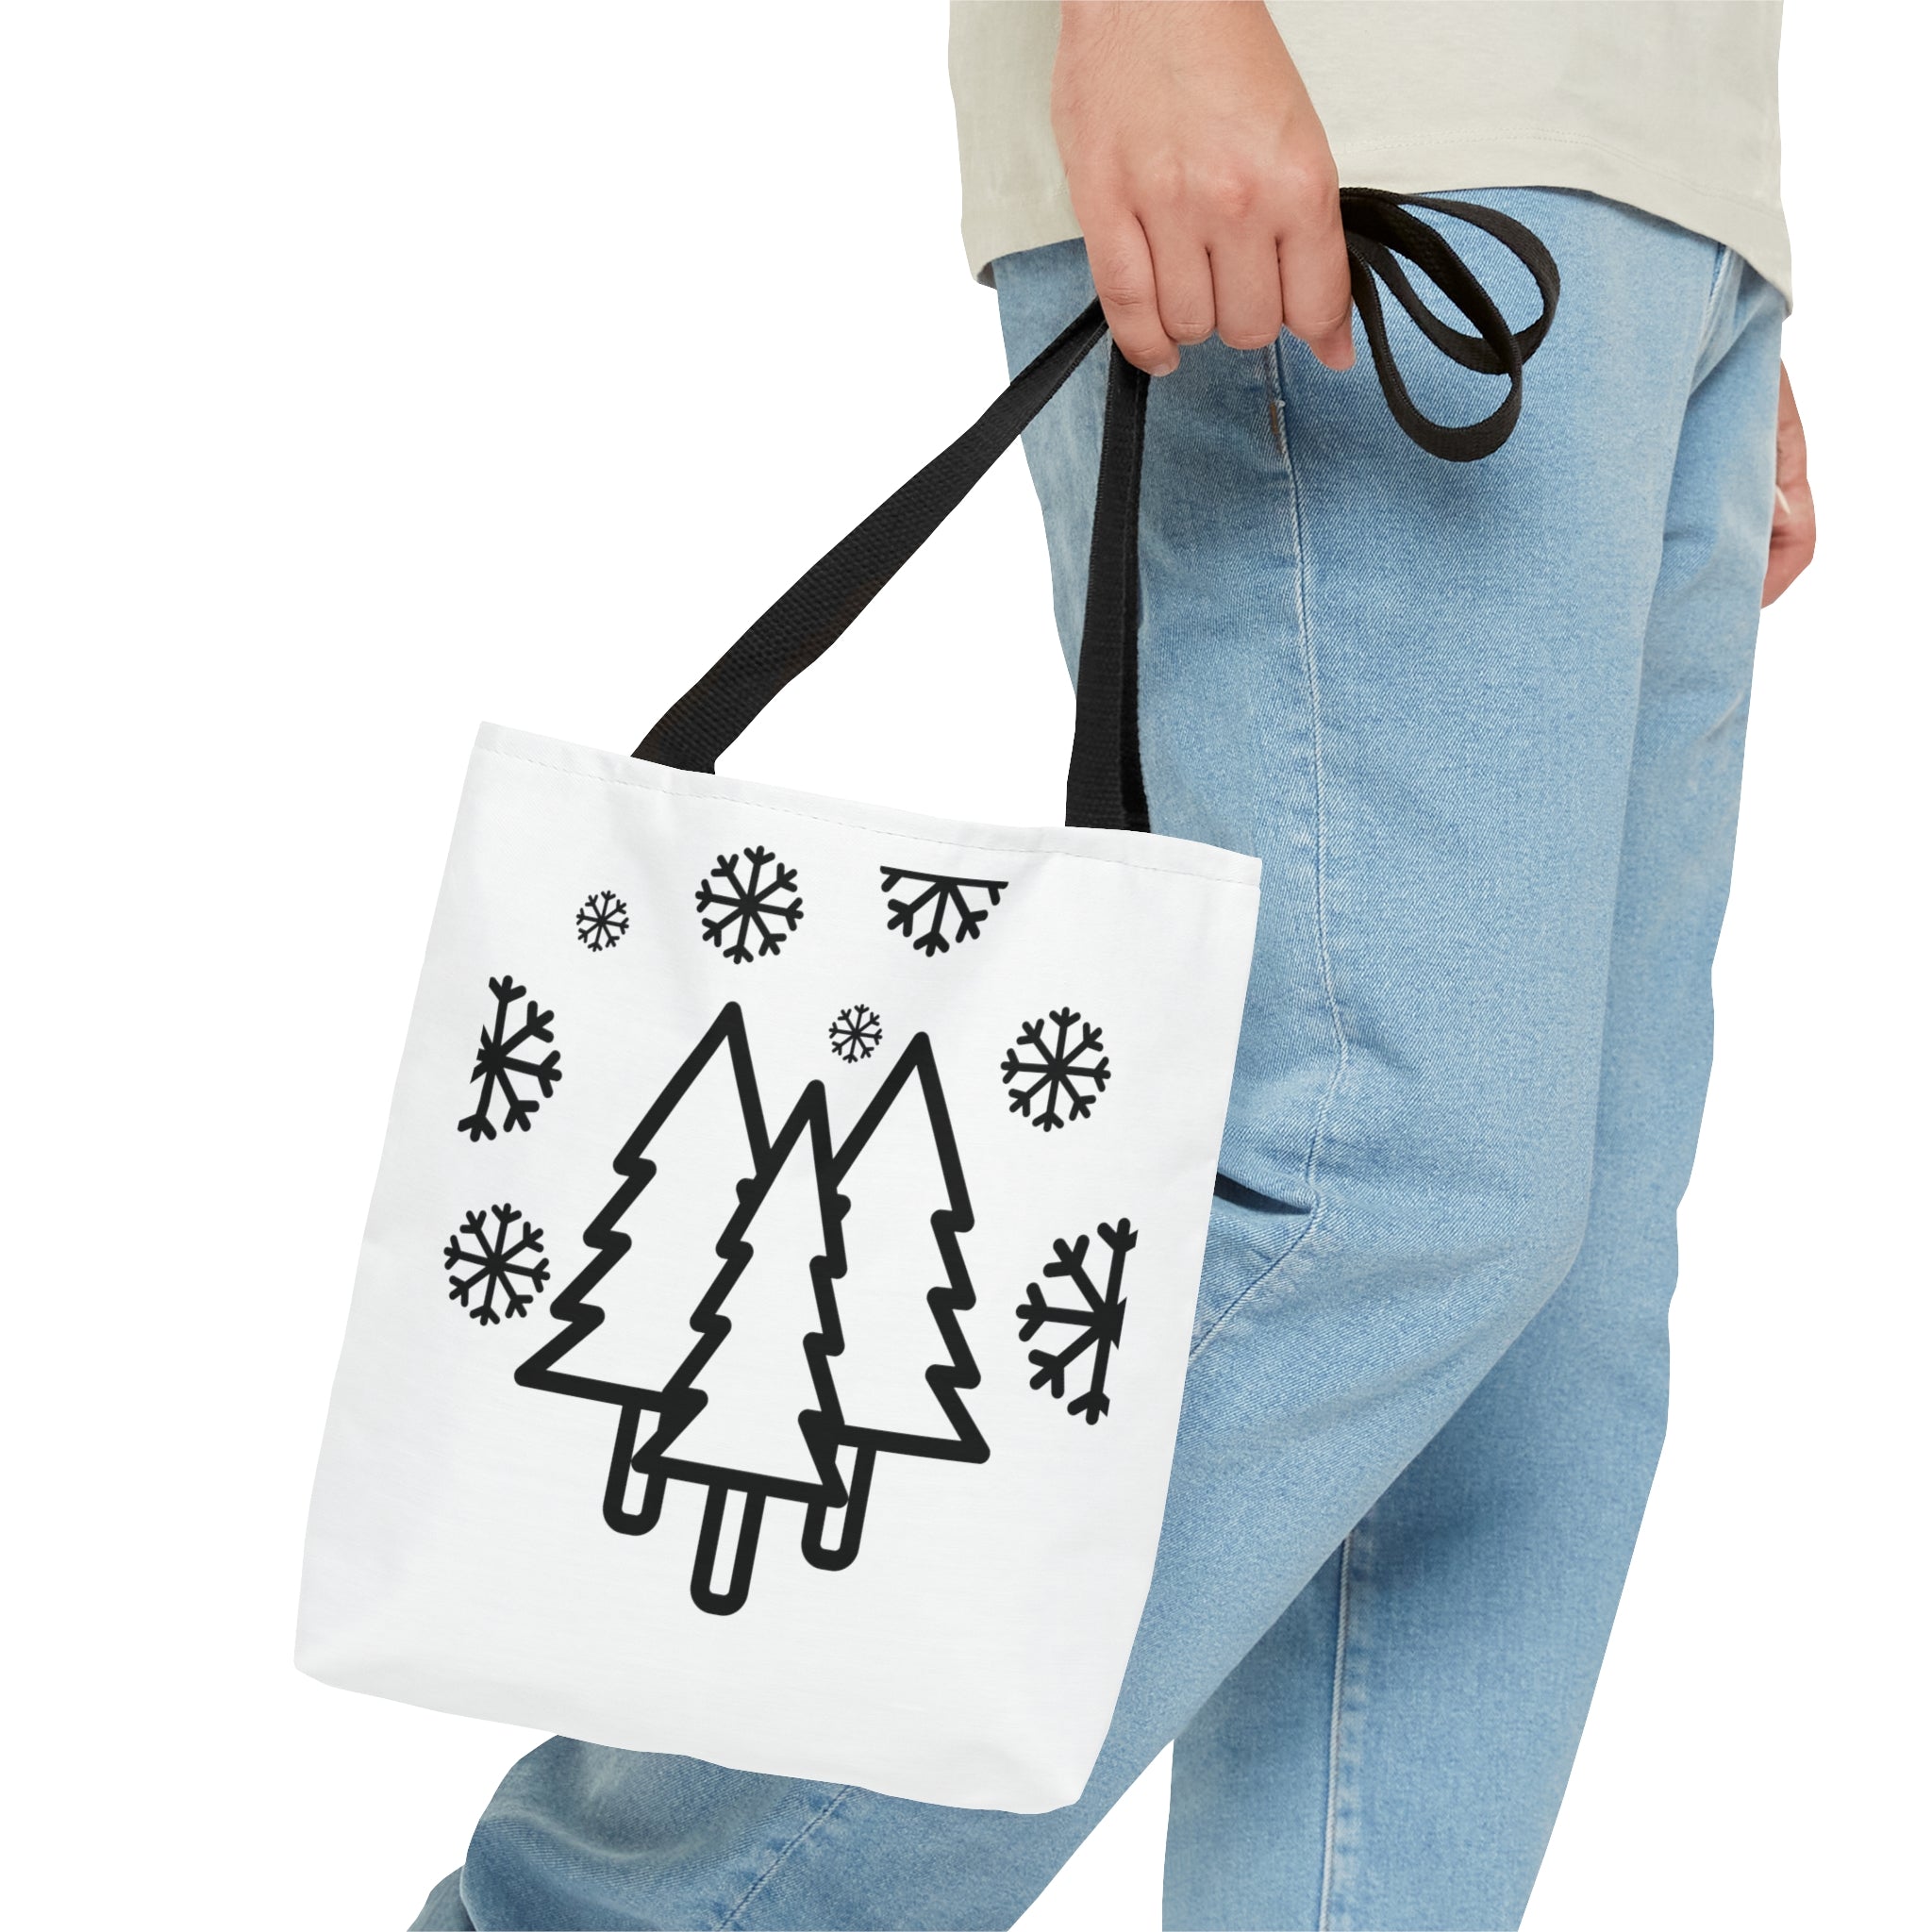 Christmas Tree Tote Bag, Reusable Canvas Tote Bags, Available in Different Size